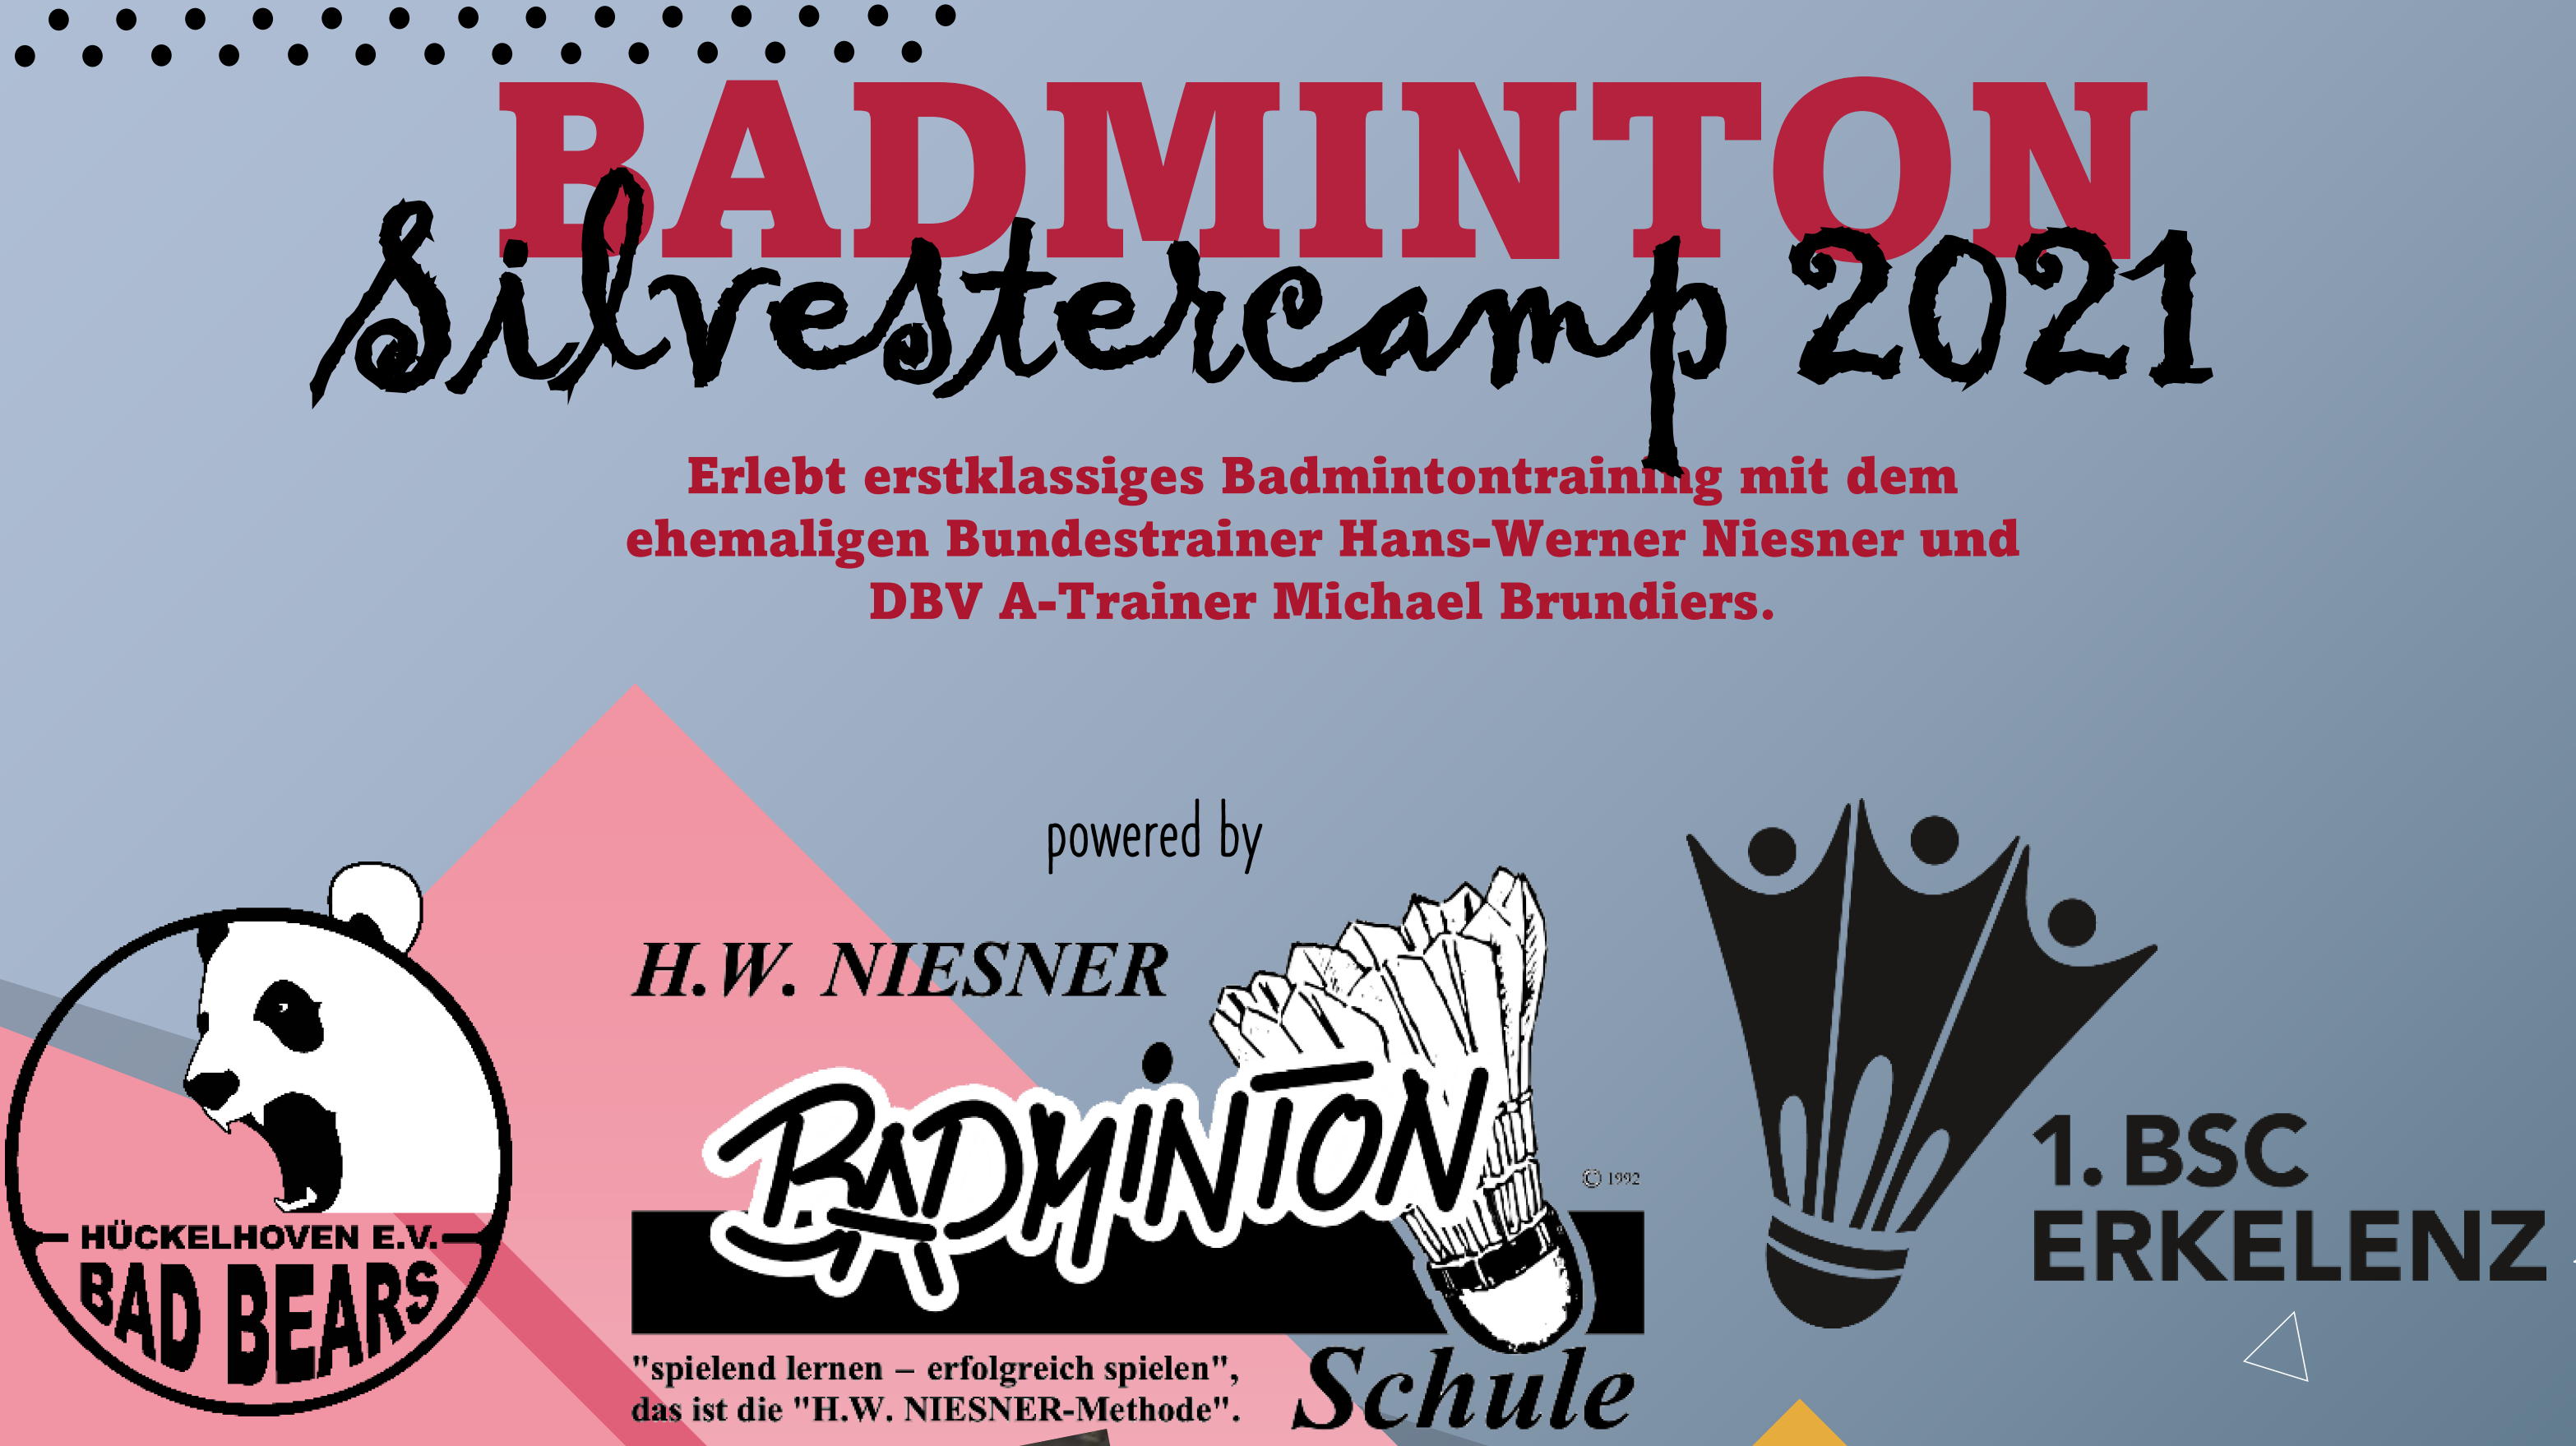 You are currently viewing Badminton Silvestercamp (update)